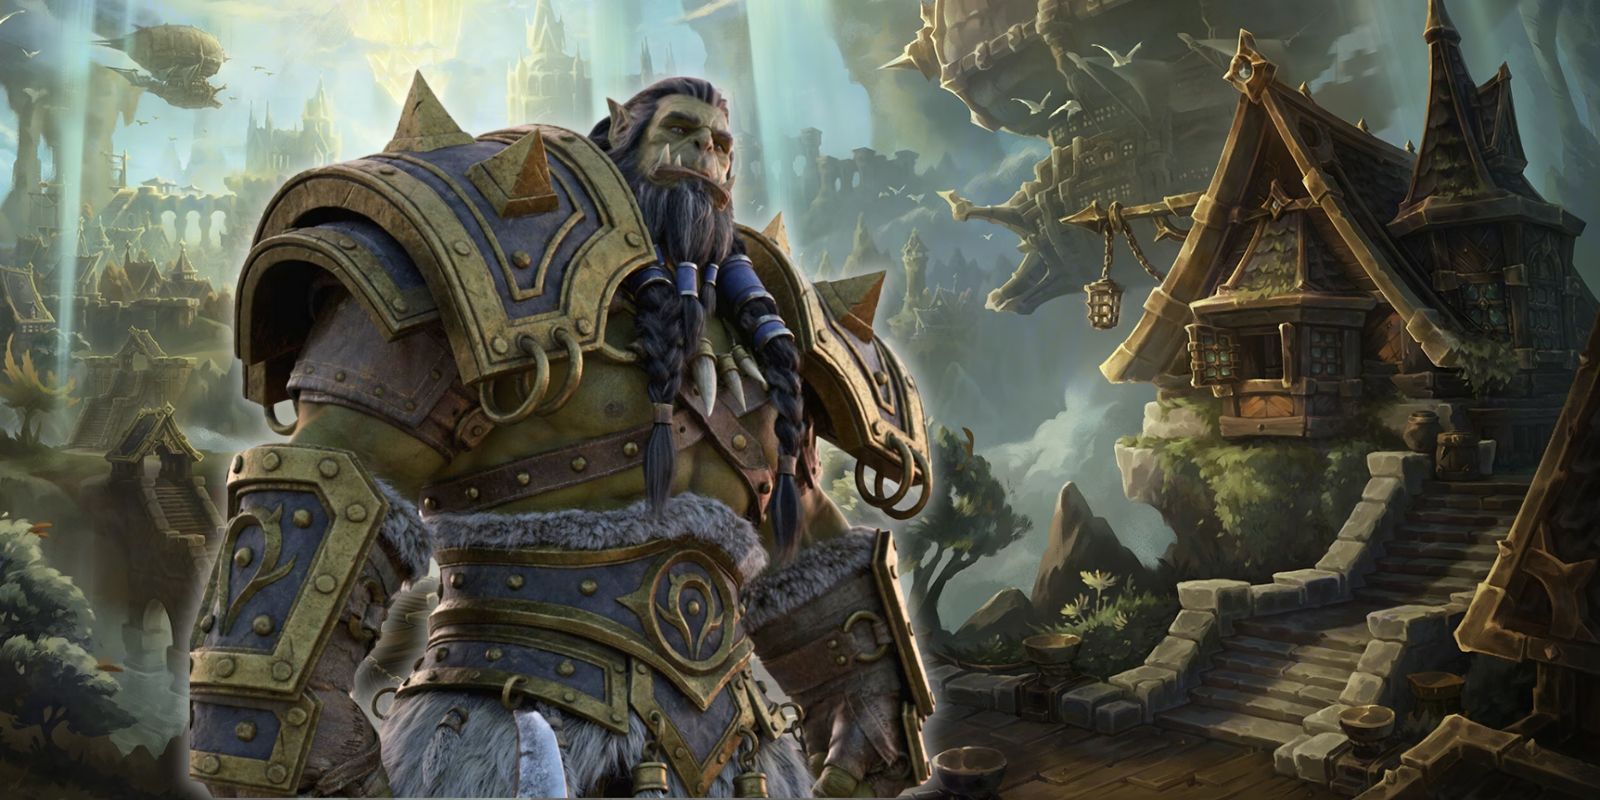 5 Reasons Why 'World of Warcraft' Is so Popular